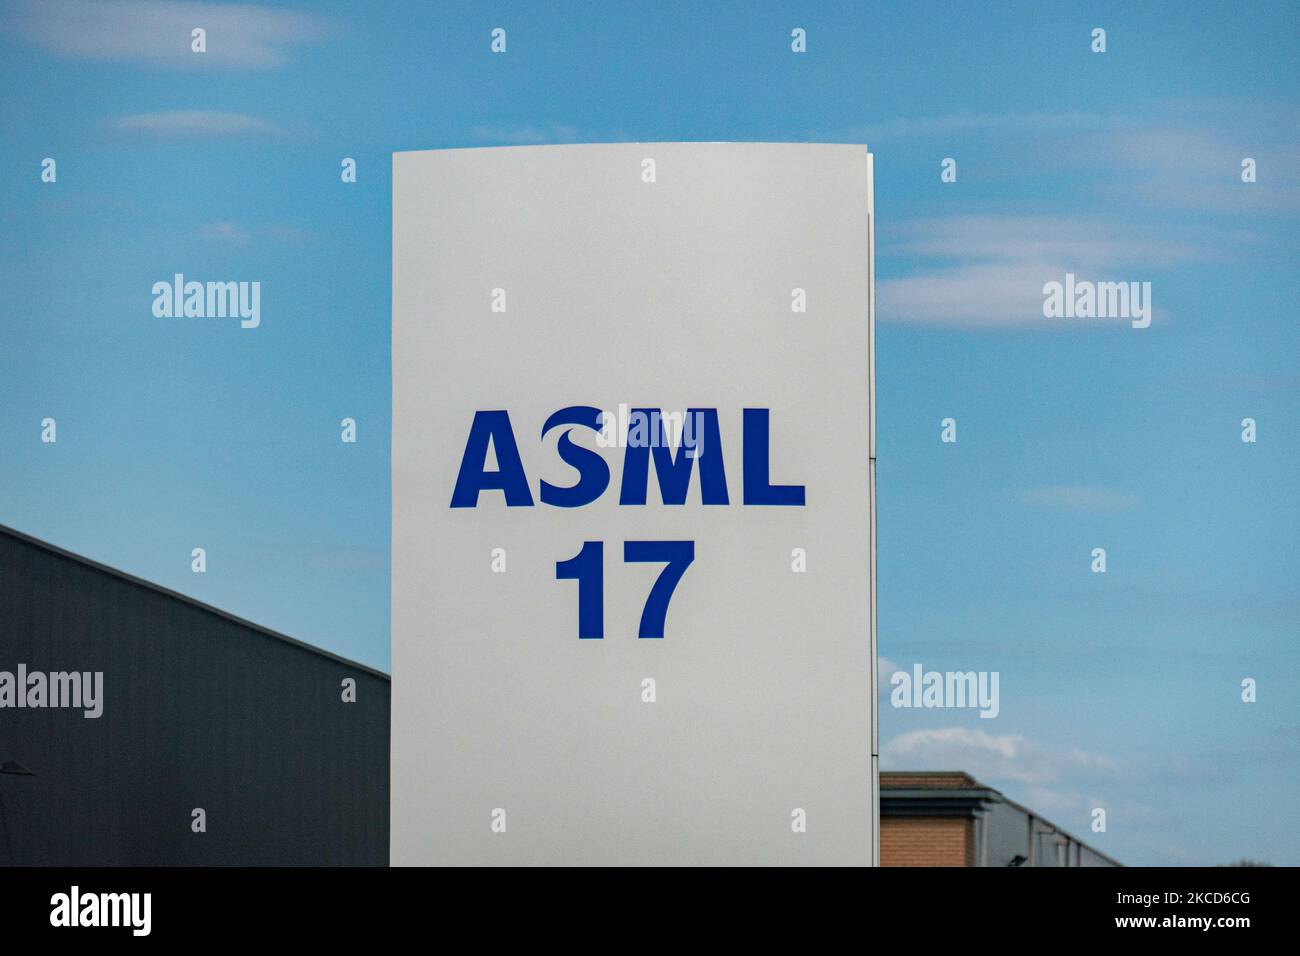 ASML logo billboard near the airport of Eindhoven. ASML is a Dutch multinational company manufacturing machines of photolithography systems, the largest supplier for the semiconductor industry in the world based in Veldhoven. ASML reported Sales up to 30% in Q1 2021 as the chip shortage boosts demand. Eindhoven, the Netherlands on April 21 2021 (Photo by Nicolas Economou/NurPhoto) Stock Photo